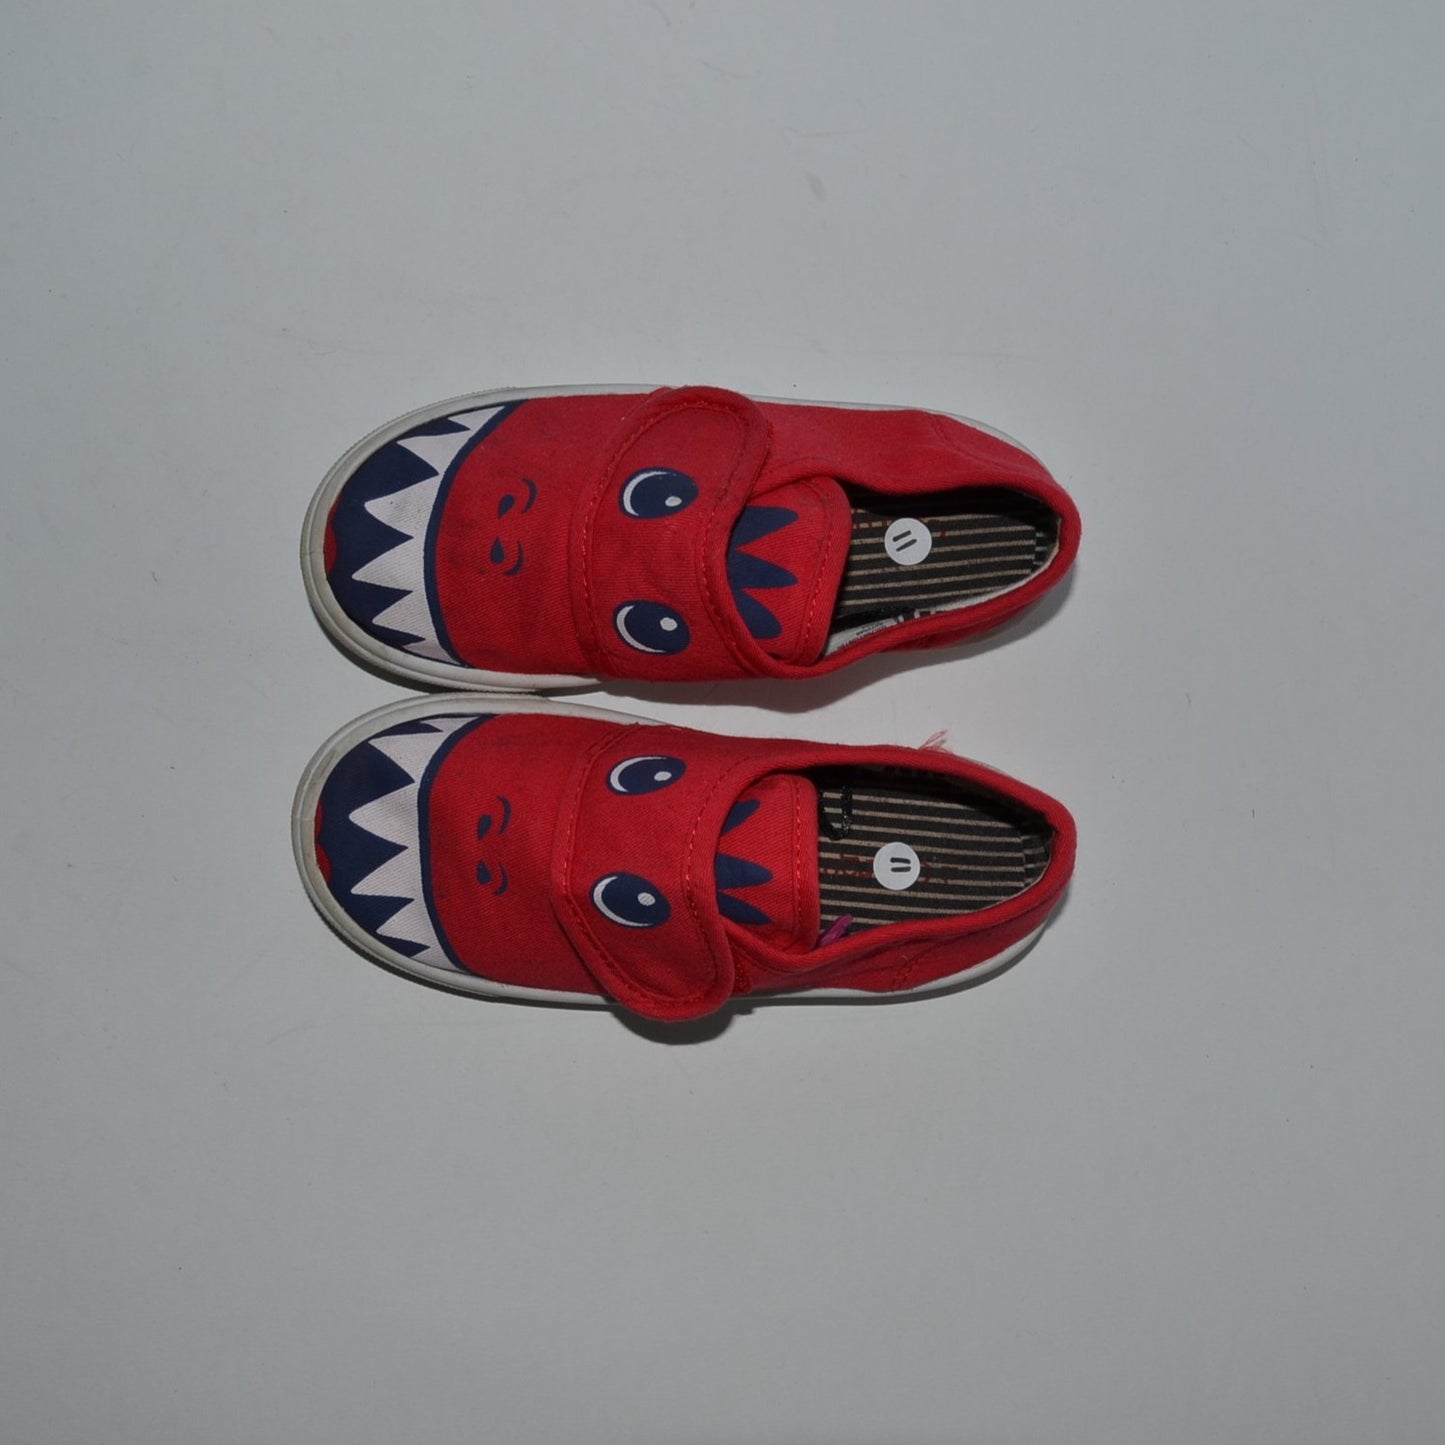 Red Monster Trainers Shoe Size 11 (jr)